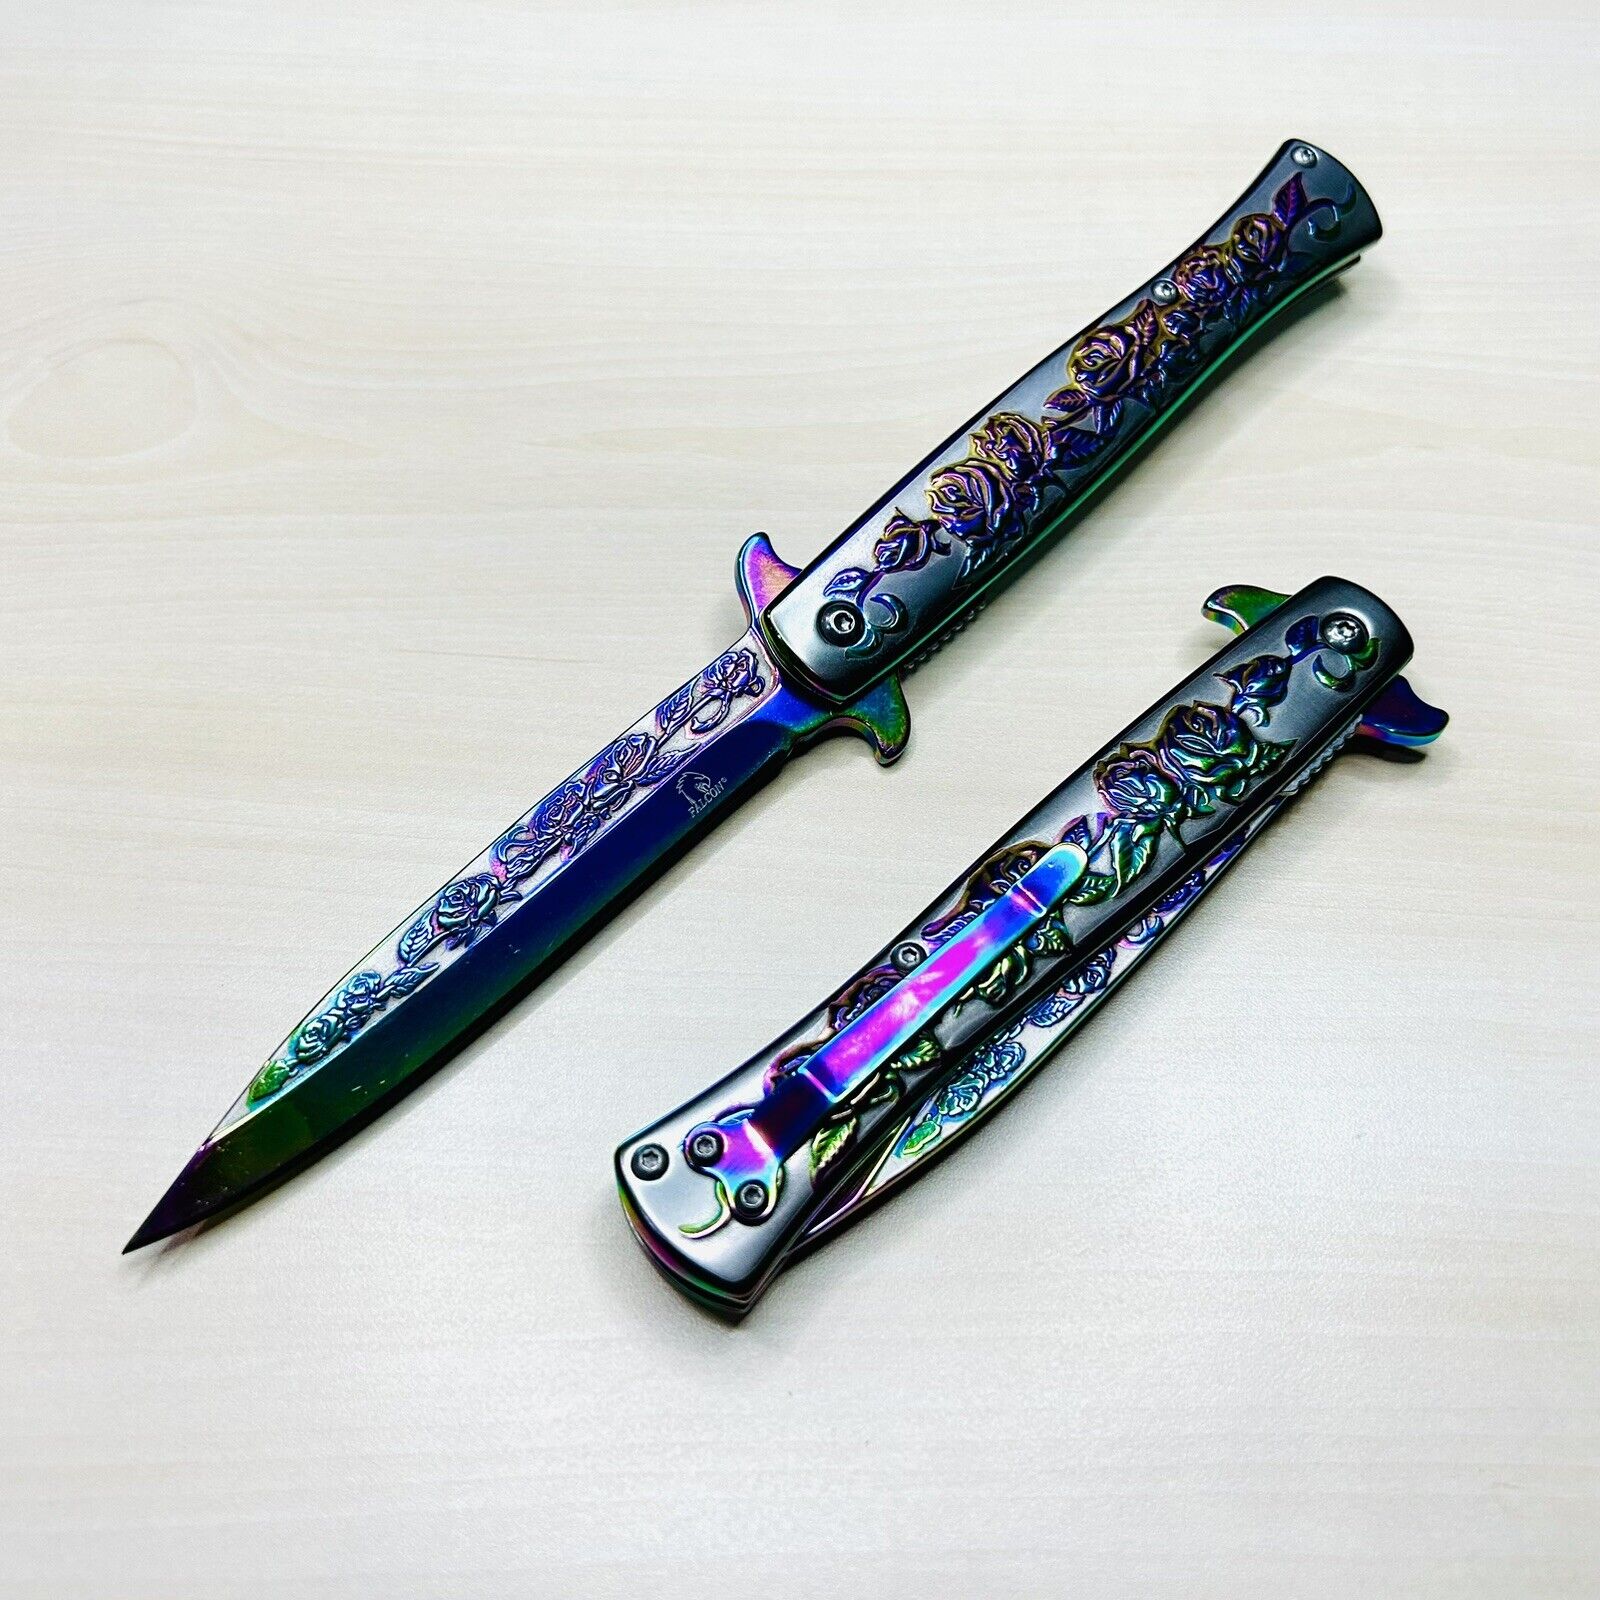 9” Rainbow Ross Knife Tactical Spring Assisted Open Blade Folding Pocket Knife